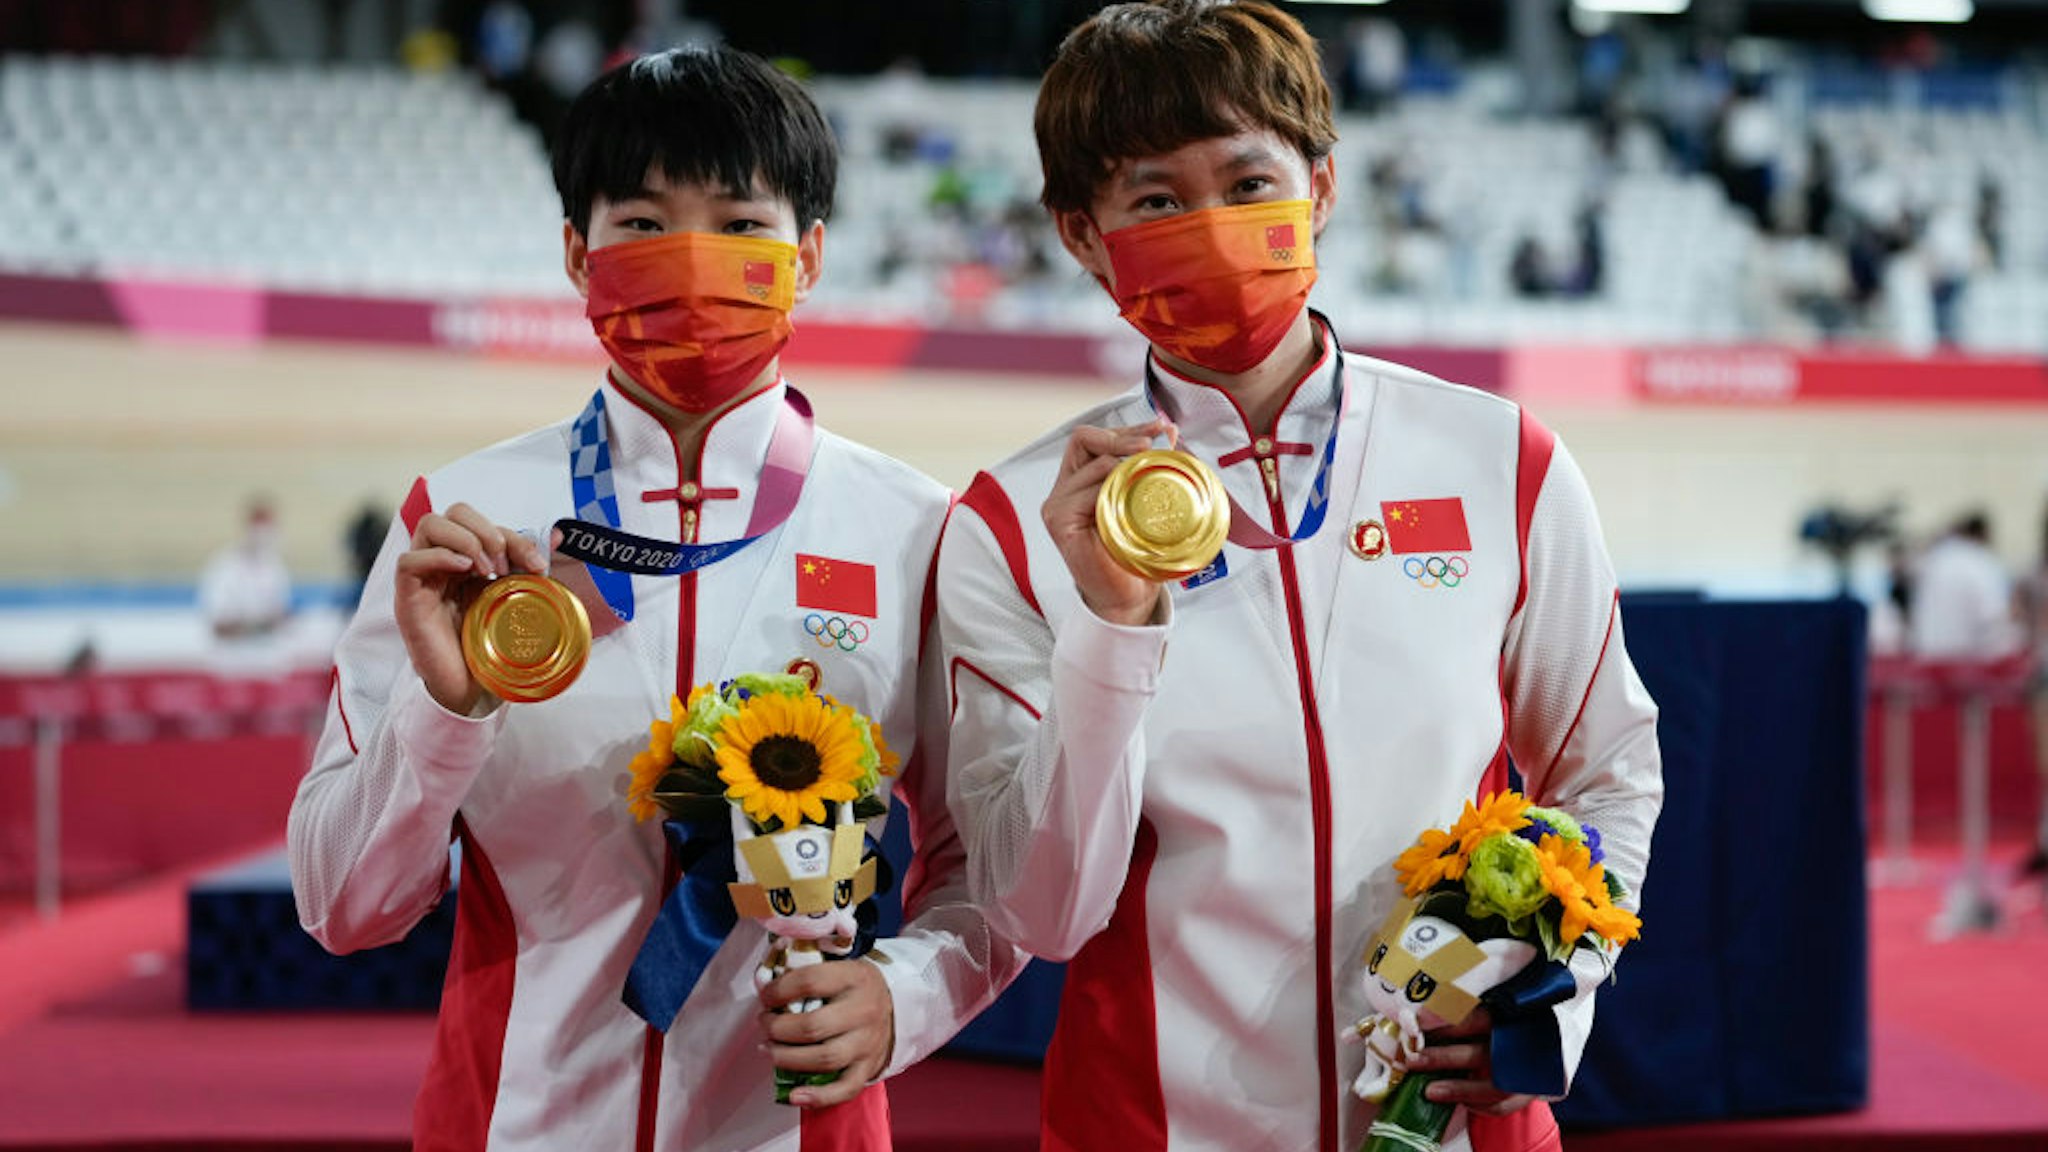 IZU, JAPAN - AUGUST 02: Gold medalists Zhong Tianshi and Bao Shanju of Team China pose during the medal ceremony for the Women's Team Sprint Finals of the Track Cycling on day ten of the Tokyo 2020 Olympic Games at Izu Velodrome on August 2, 2021 in Izu, Shizuoka, Japan. (Photo by Wei Zheng/CHINASPORTS/VCG via Getty Images)